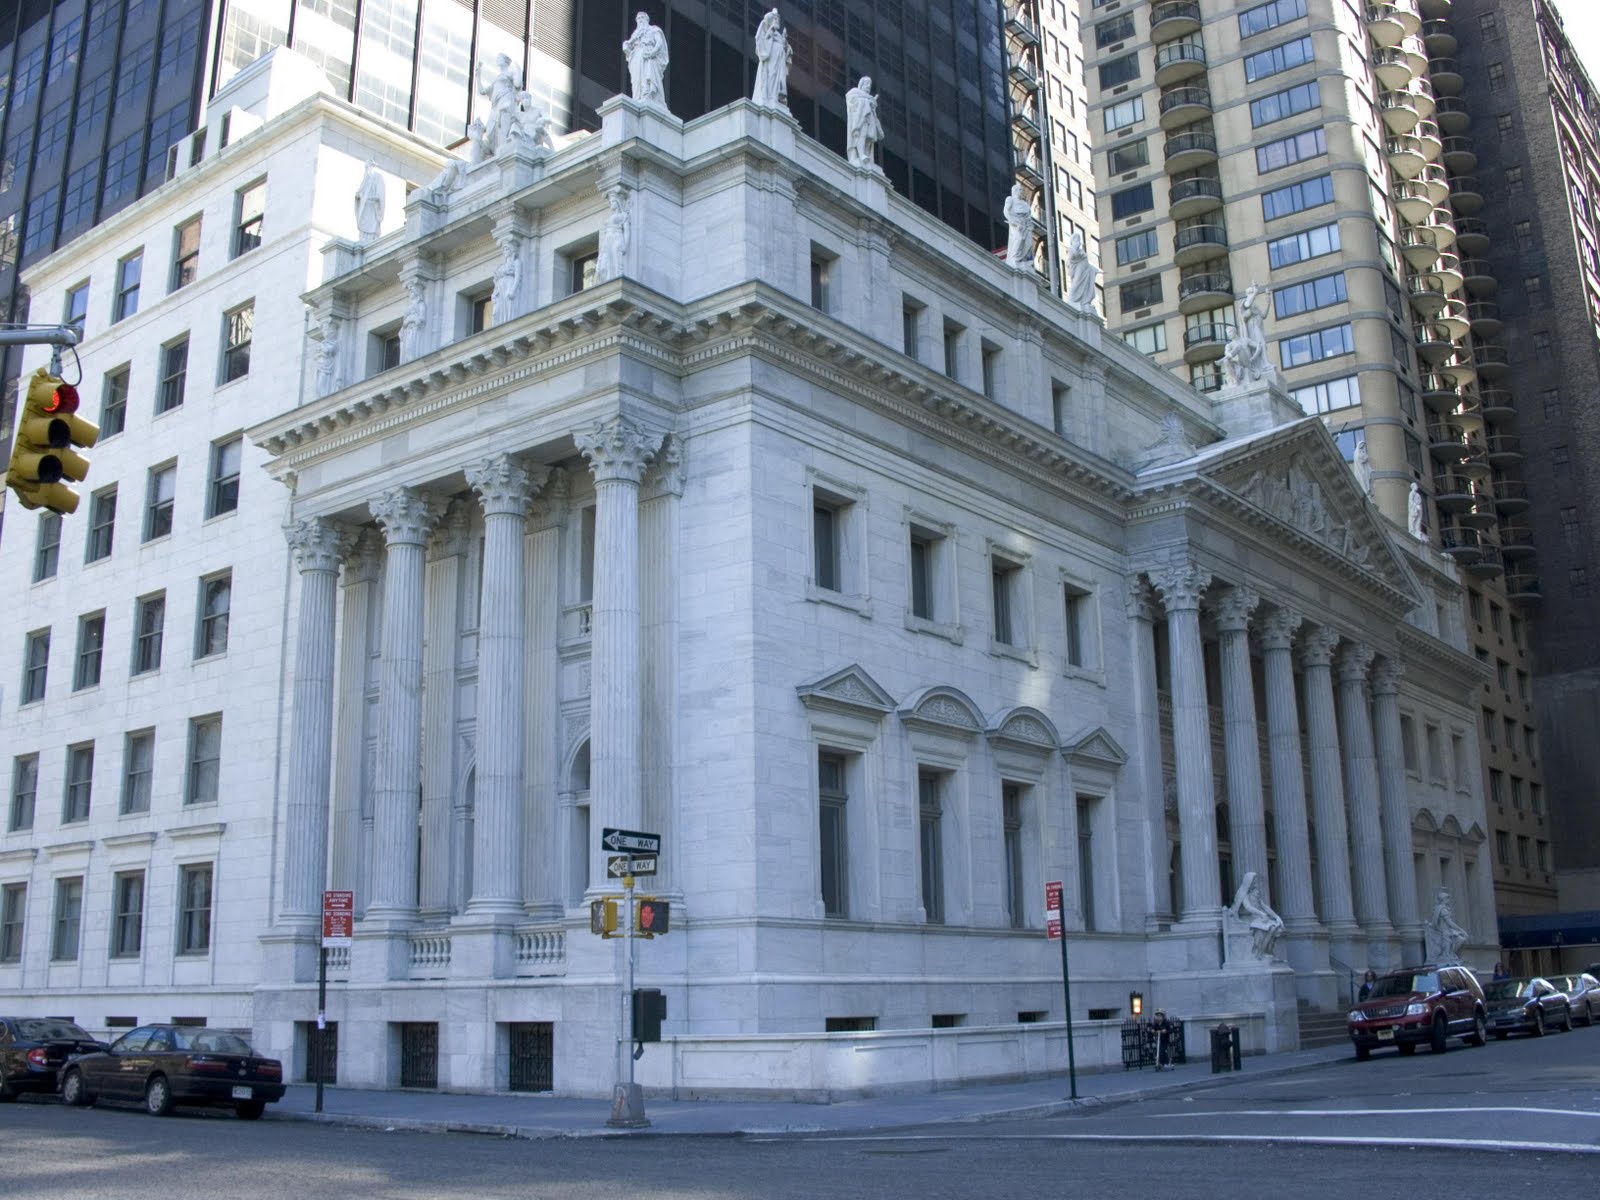 Treasures on the East 25th Street Courthouse